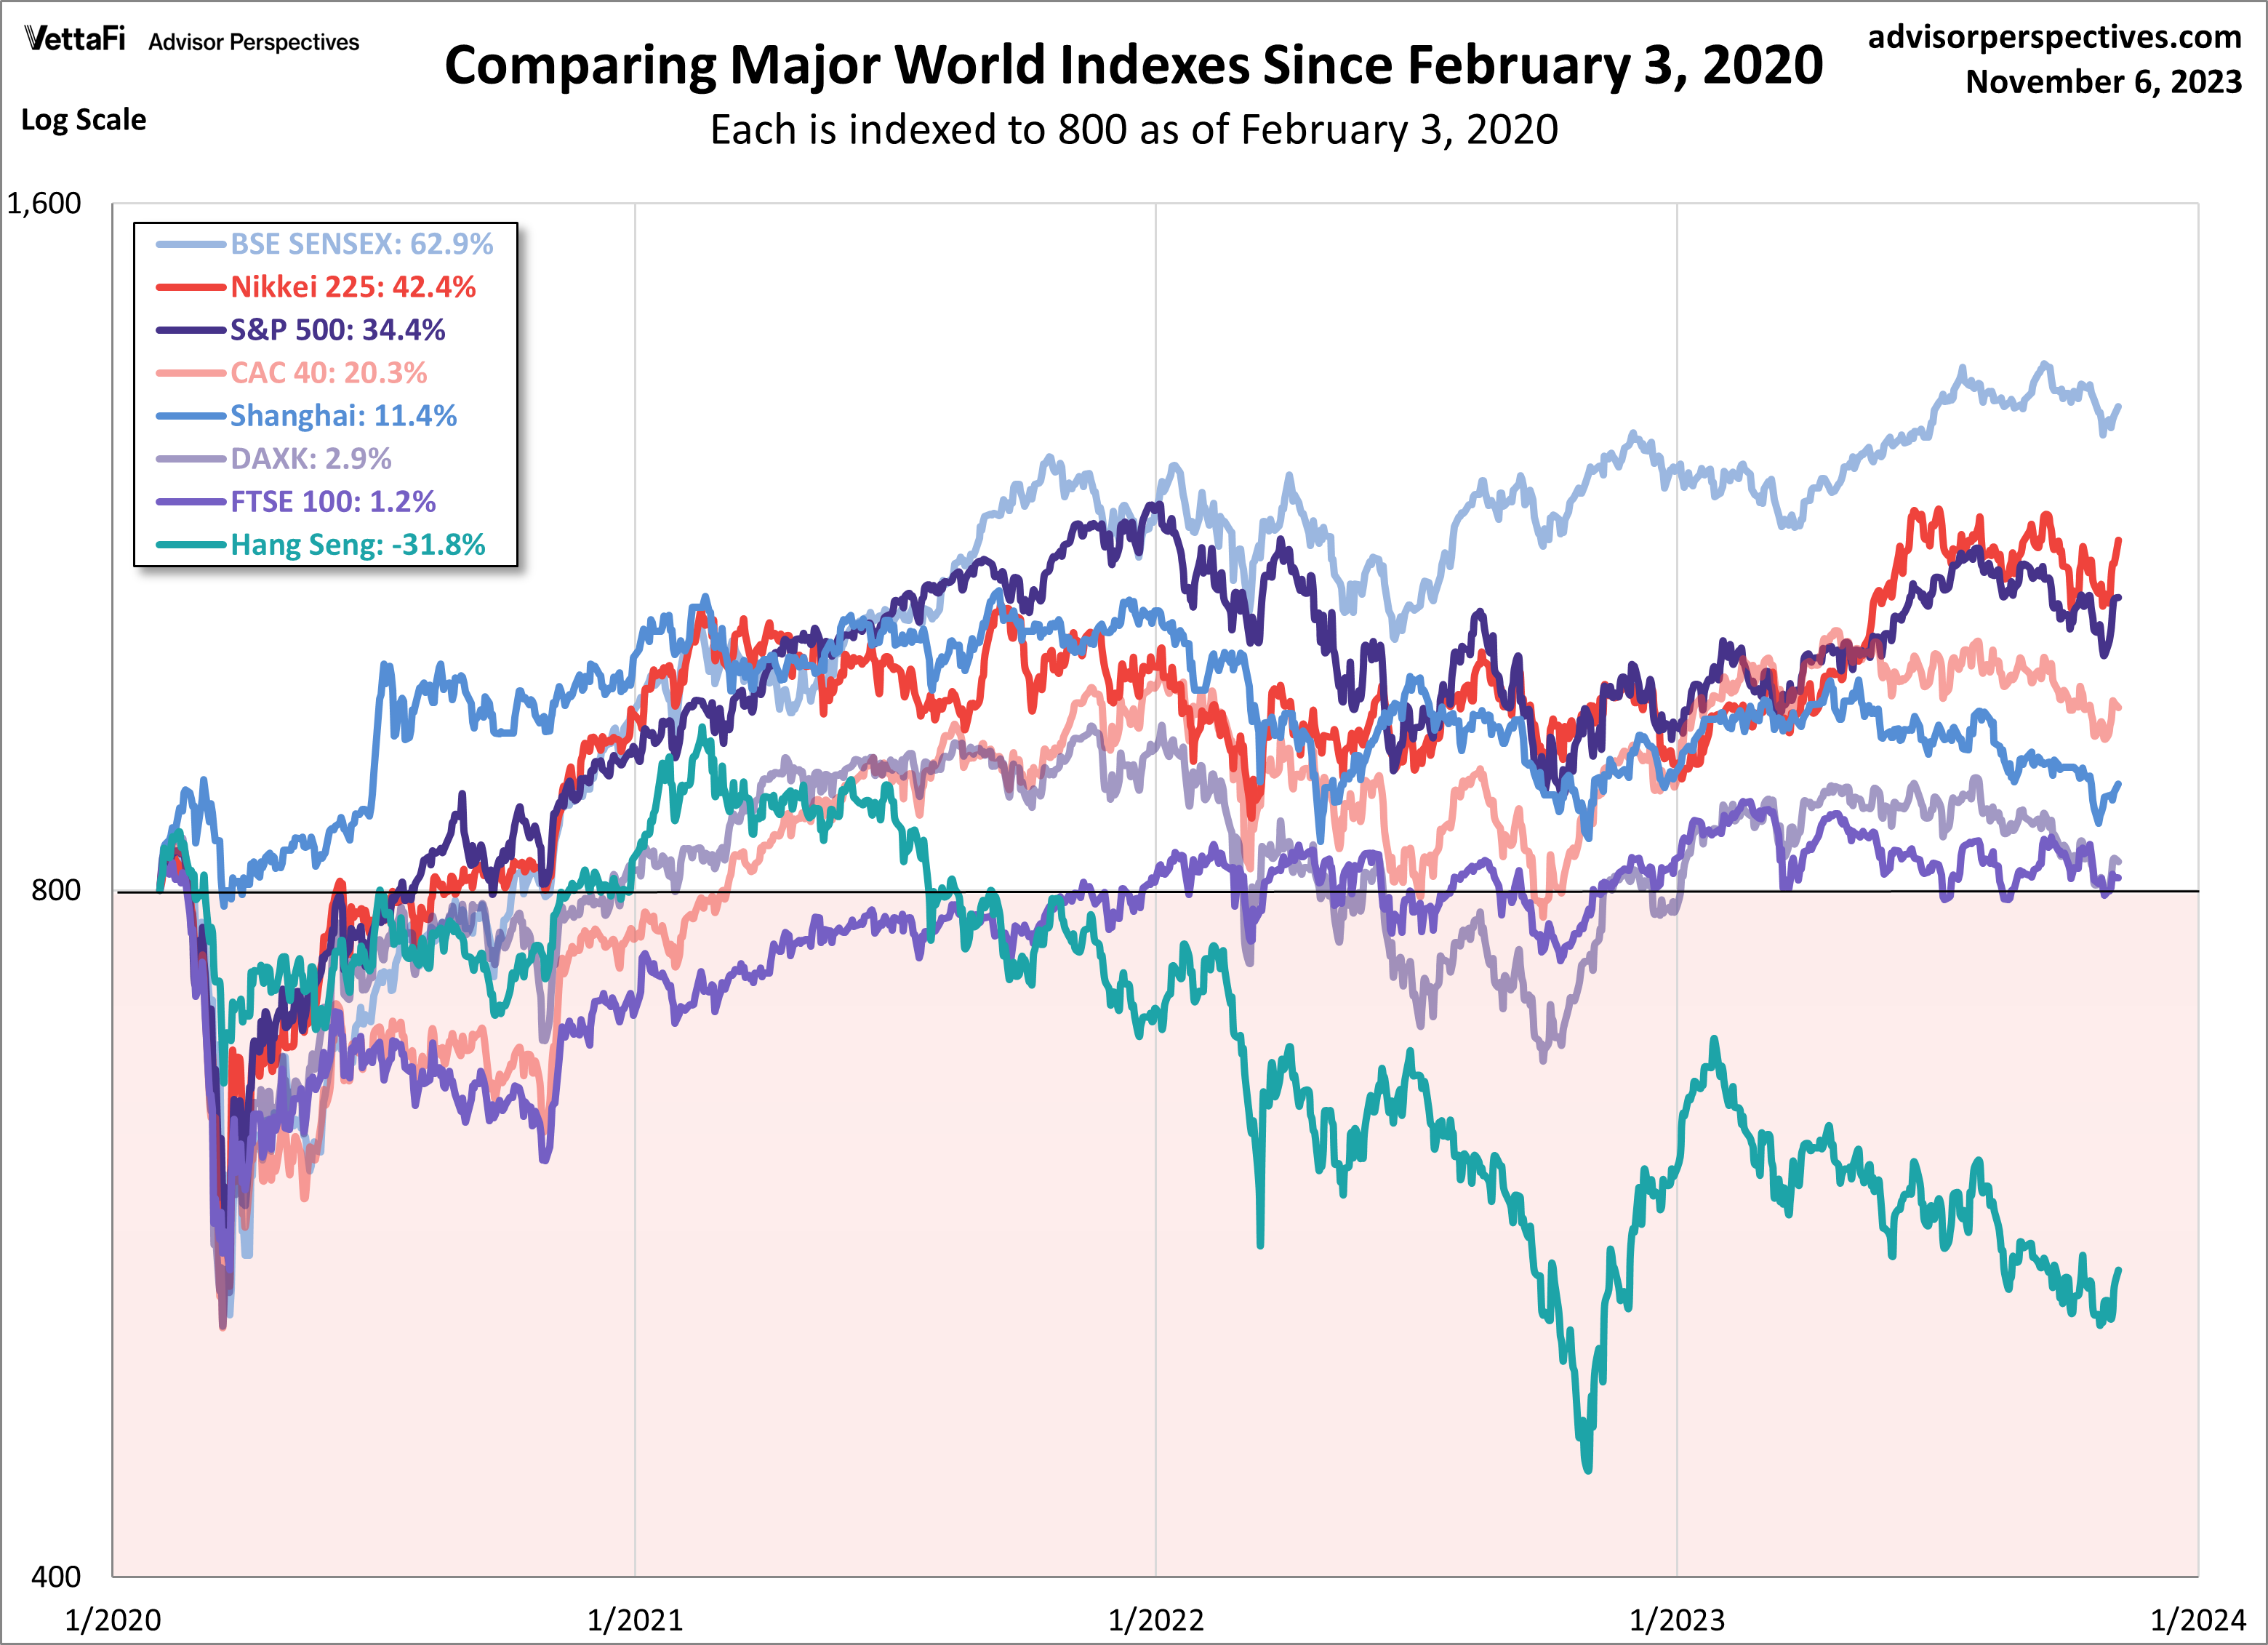 Comparing Major World Indexes since 2/3/2020